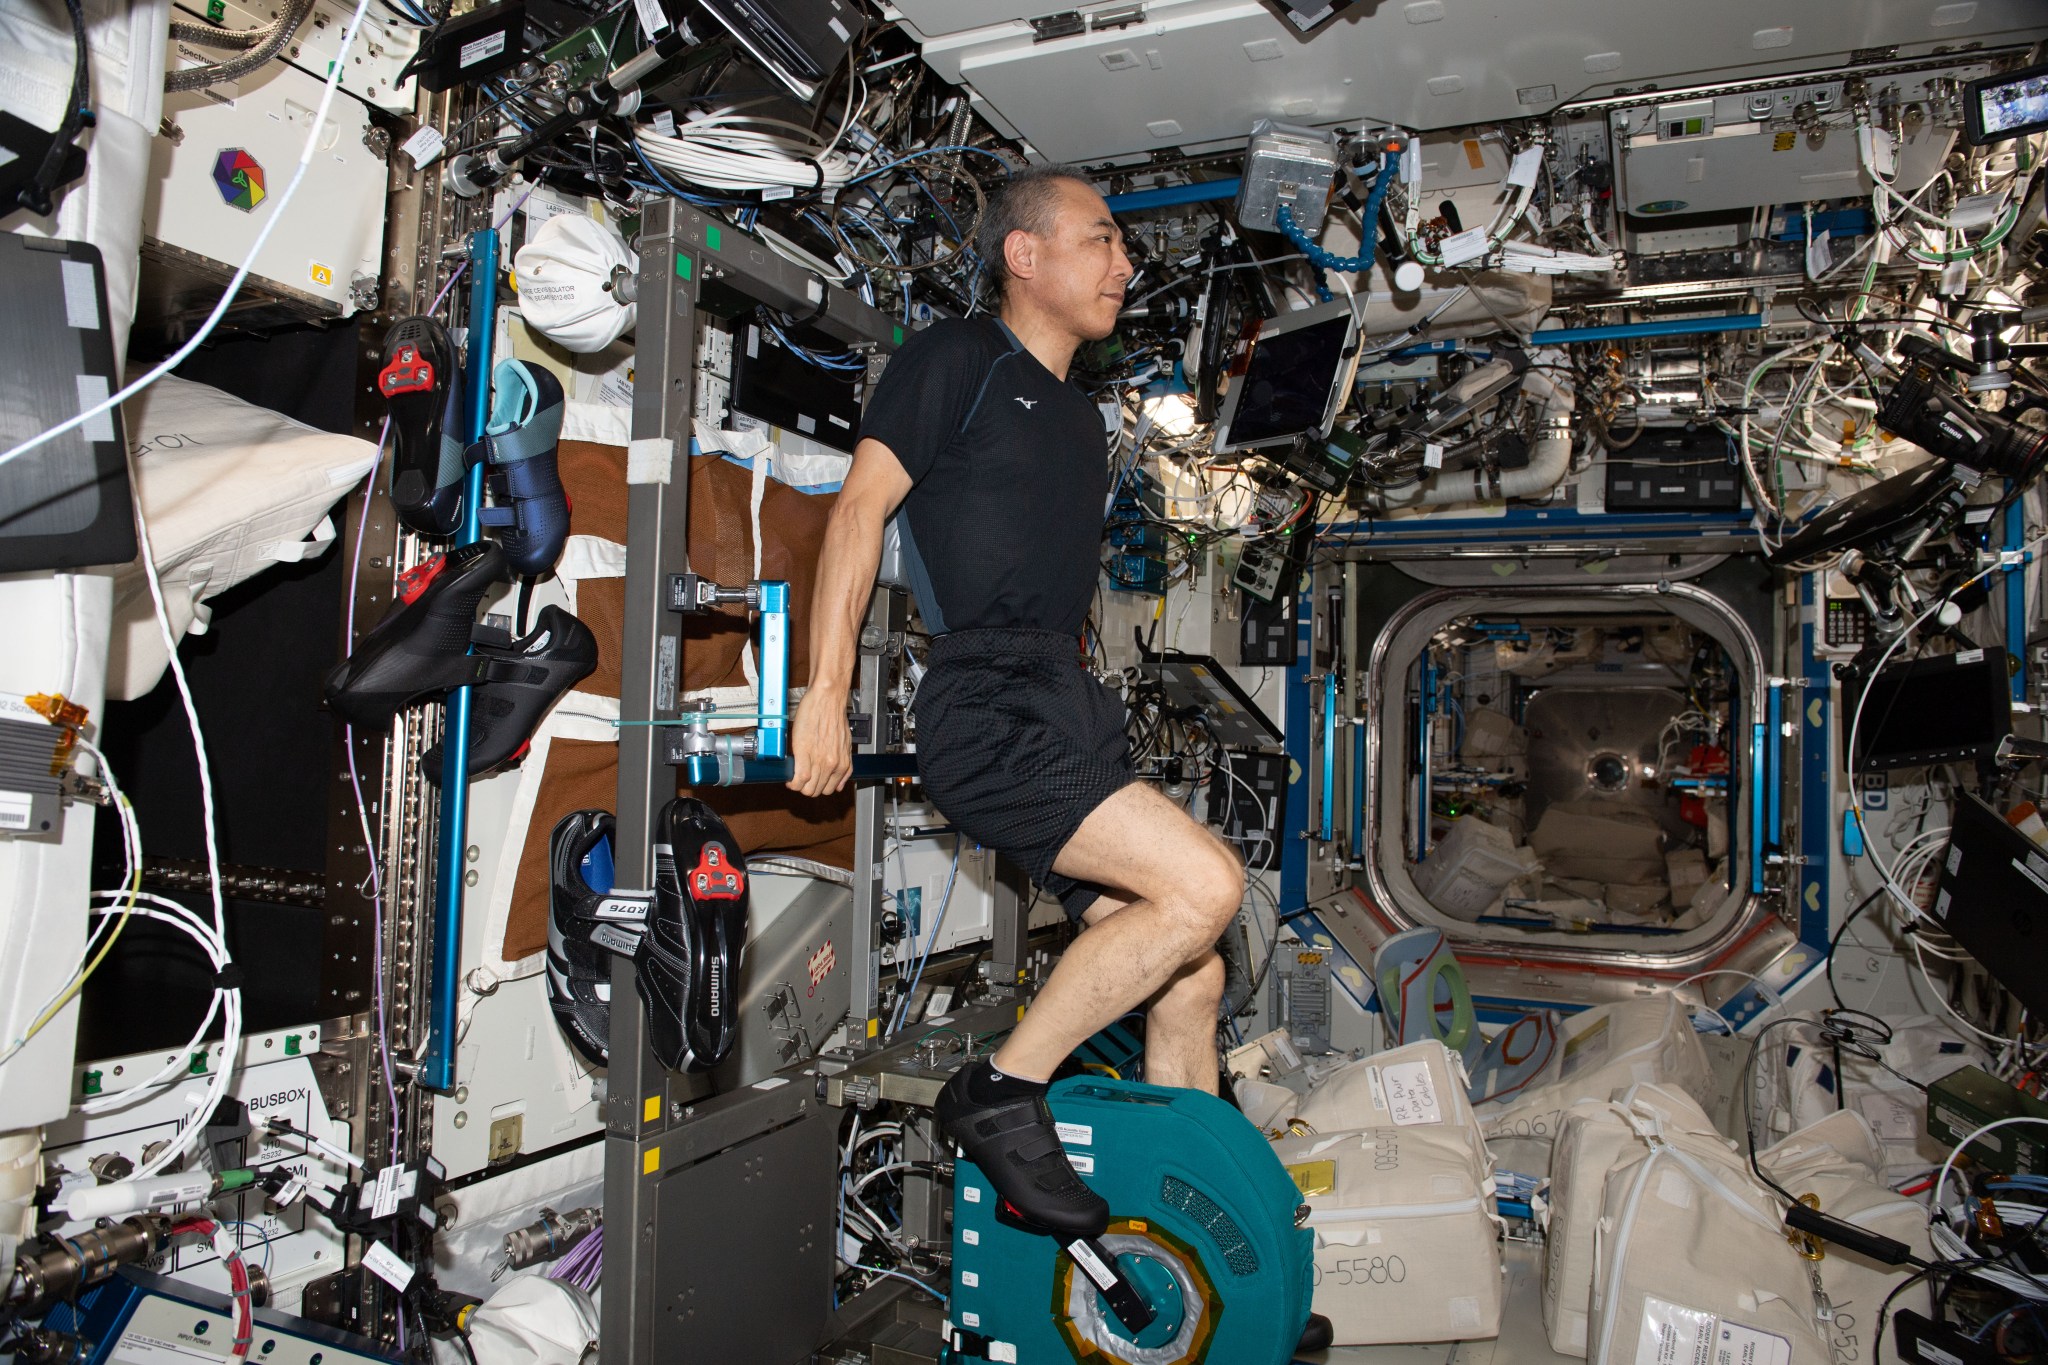 Furukawa wears a black shirt, shorts, and shoes. He holds on to a bar behind him and has his feet on the pedals on CEVIS, a teal boxy device about the size of a sofa cushion. Three pairs of shoes hang from bars to his right and the walls around him are covered in equipment, laptops, cords, hoses, and storage bags.